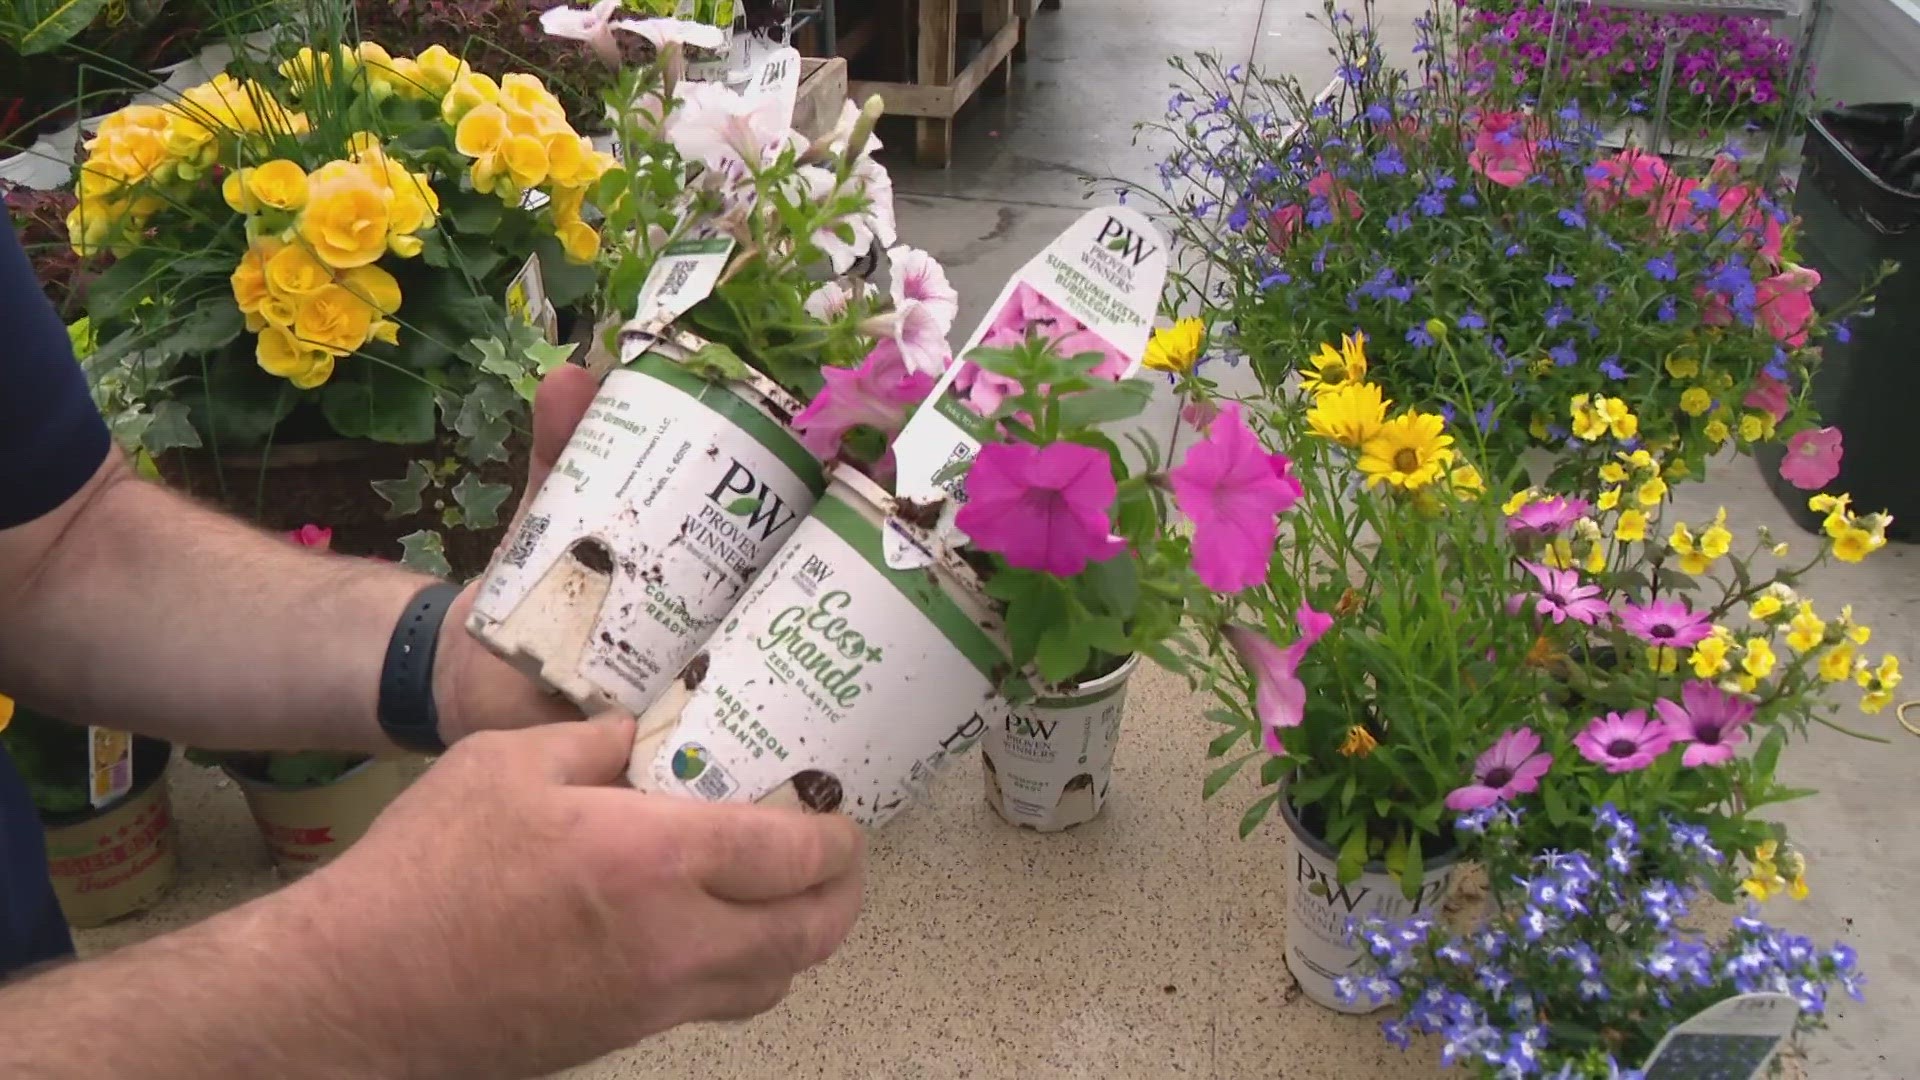 Generally, Hoosiers start planting annuals around Mother's Day. Pat Sullivan shared some favorites for sun and shade.